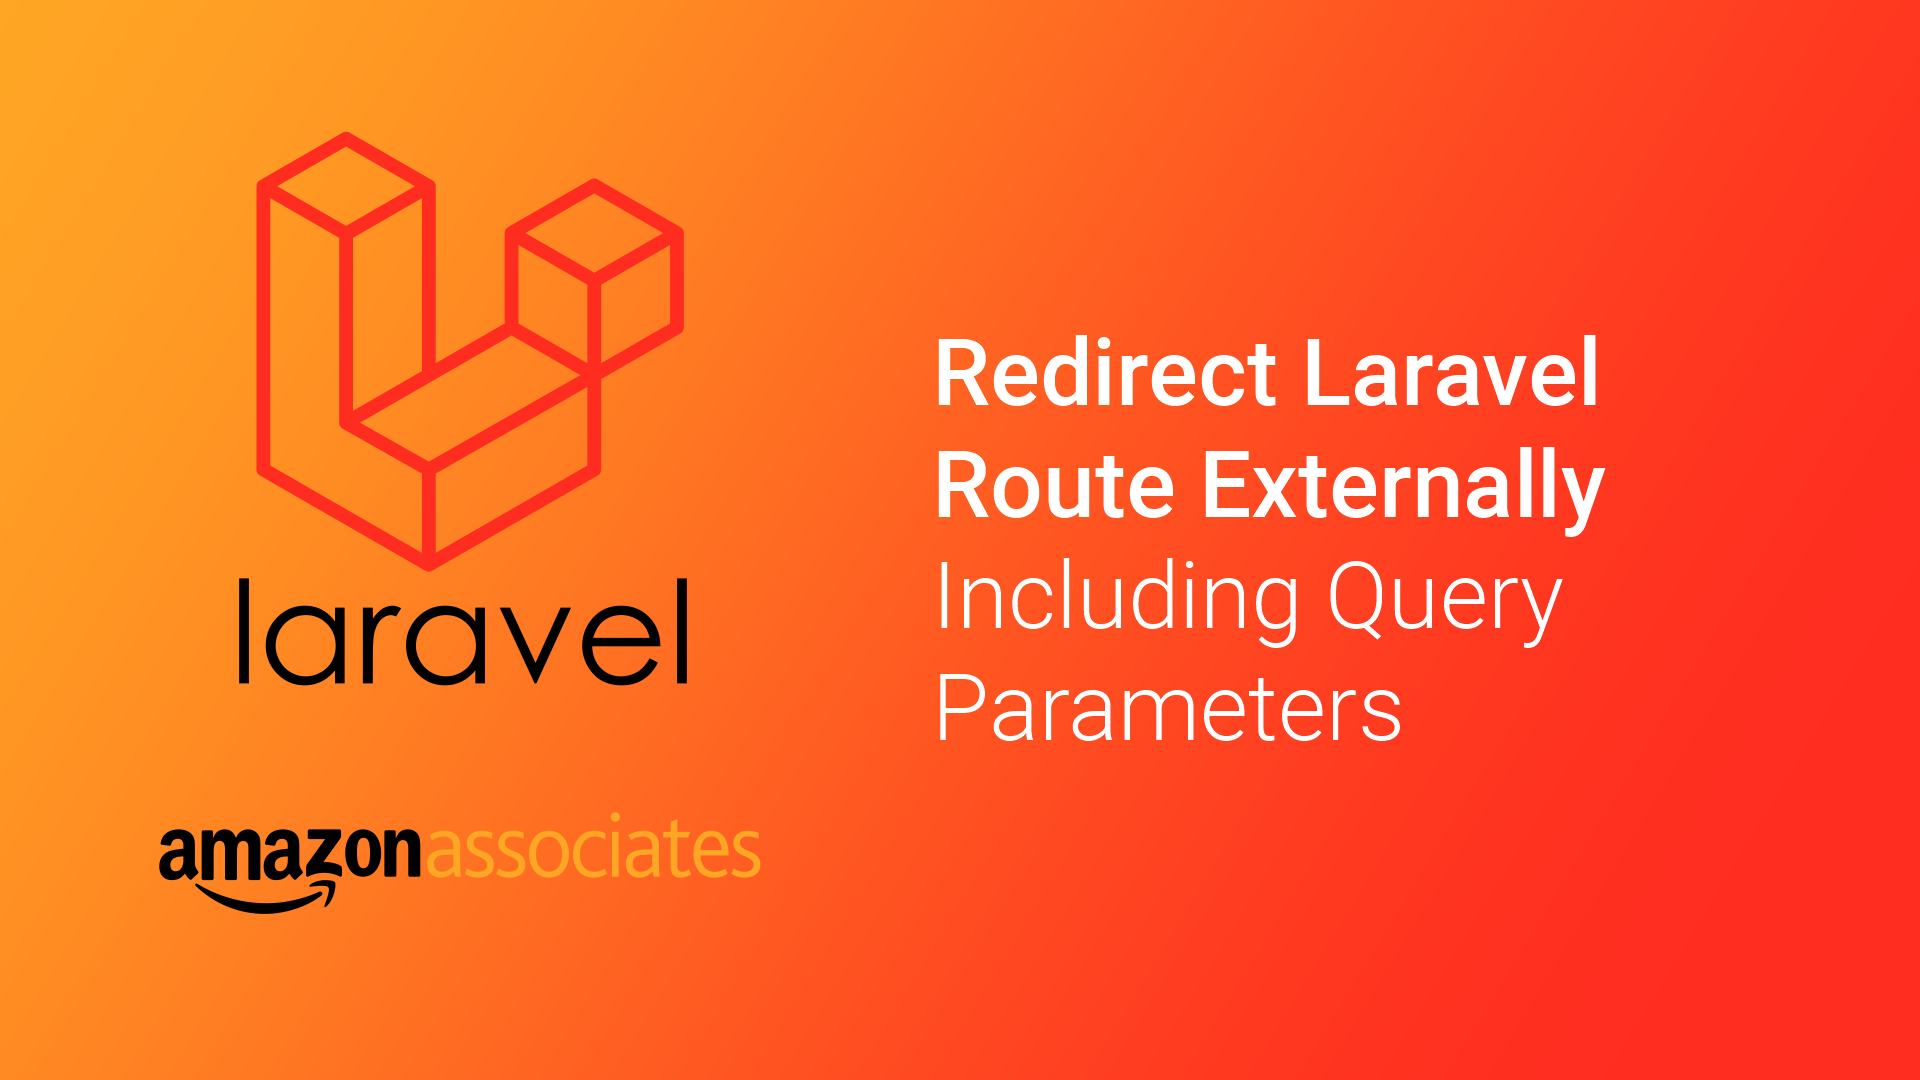 Redirect Laravel Route Externally Including Query Parameters